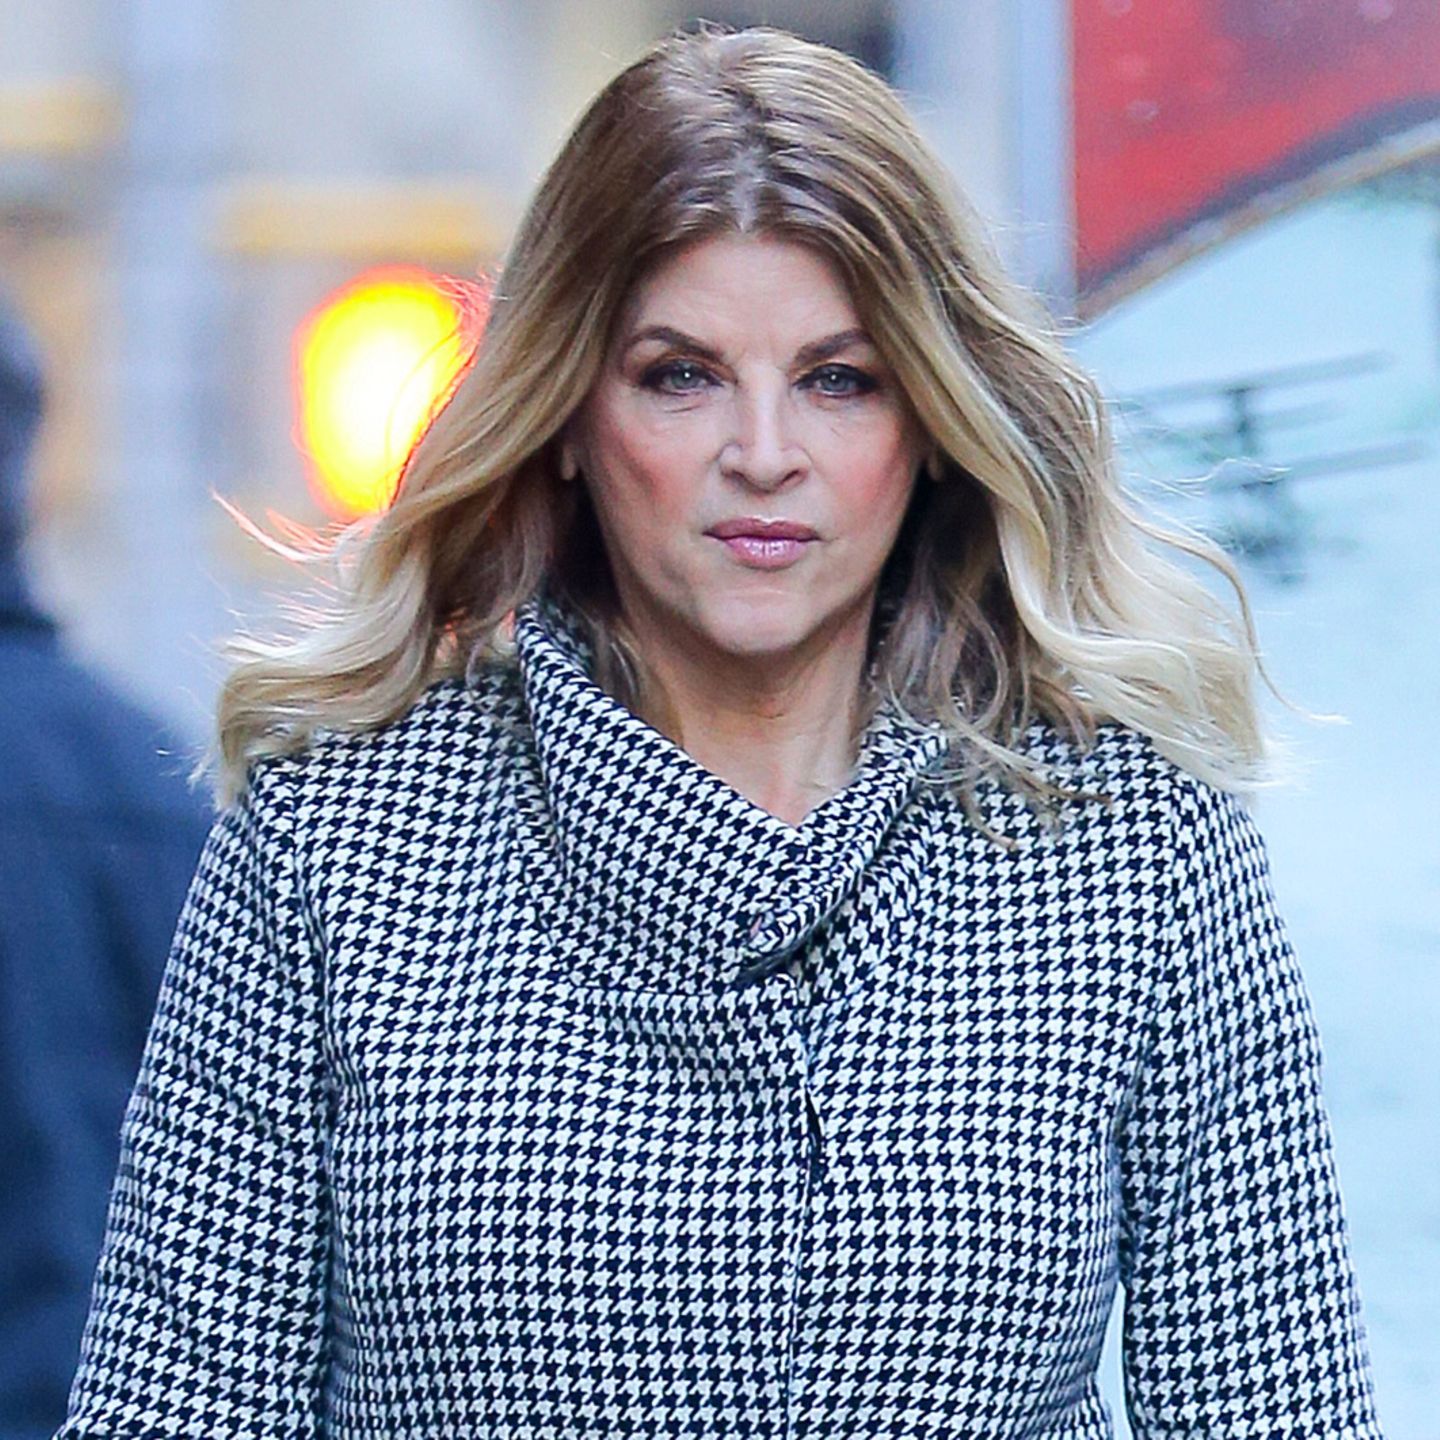 Is kirstie alley the latest celeb to flee california? 